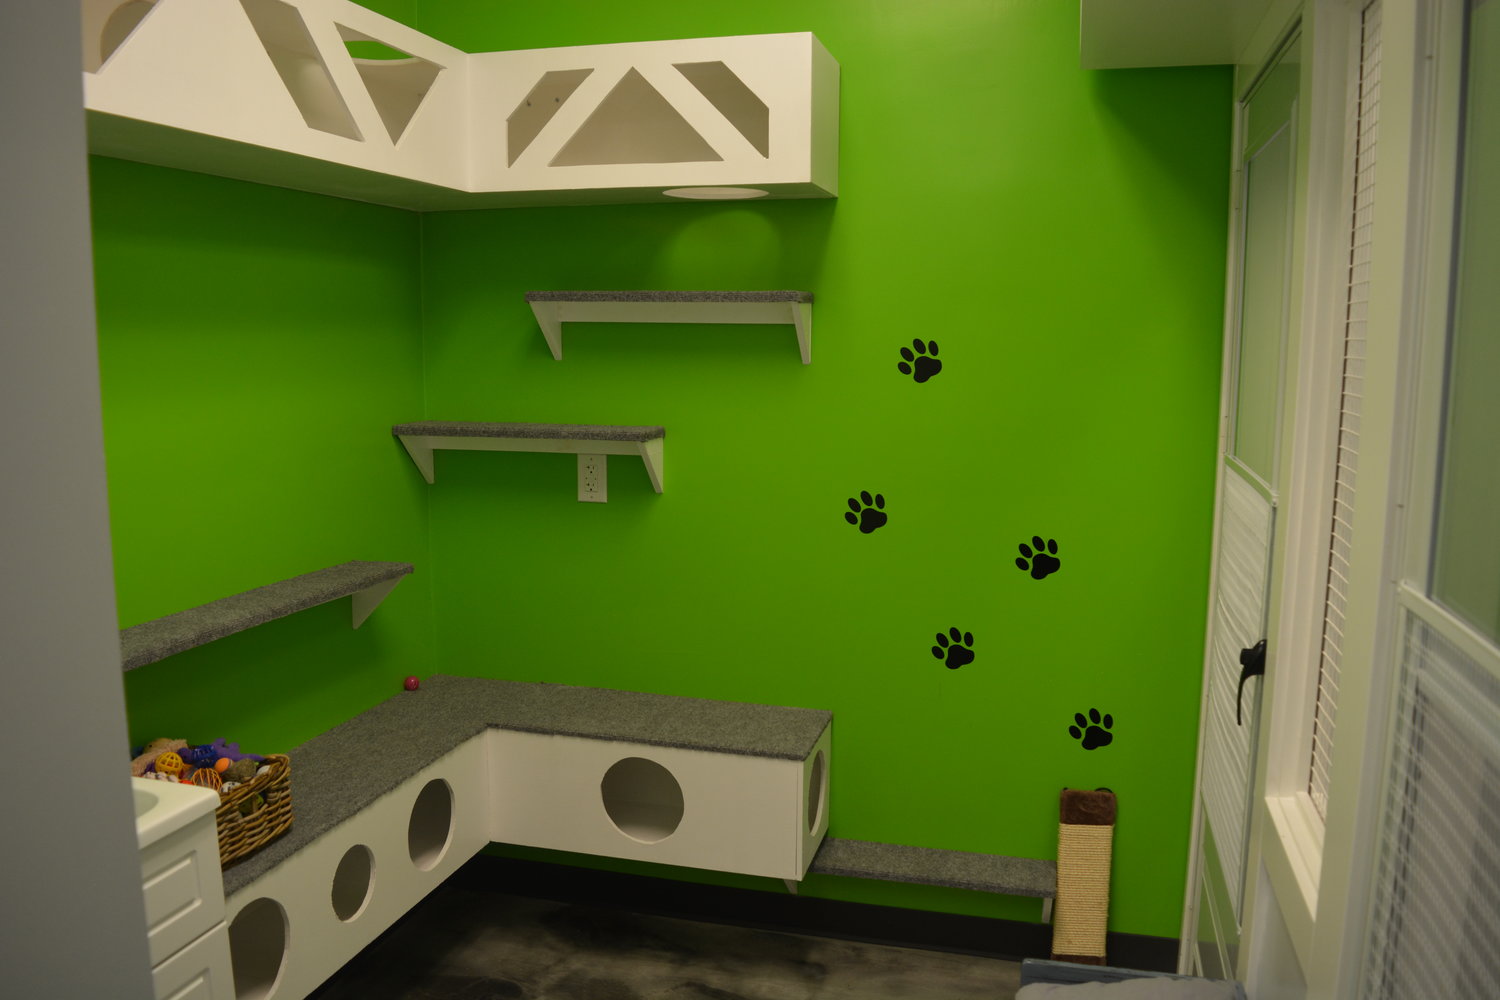 A deluxe suite of the cat hotel at All Natural Pet Supplies is pictured on June 22.